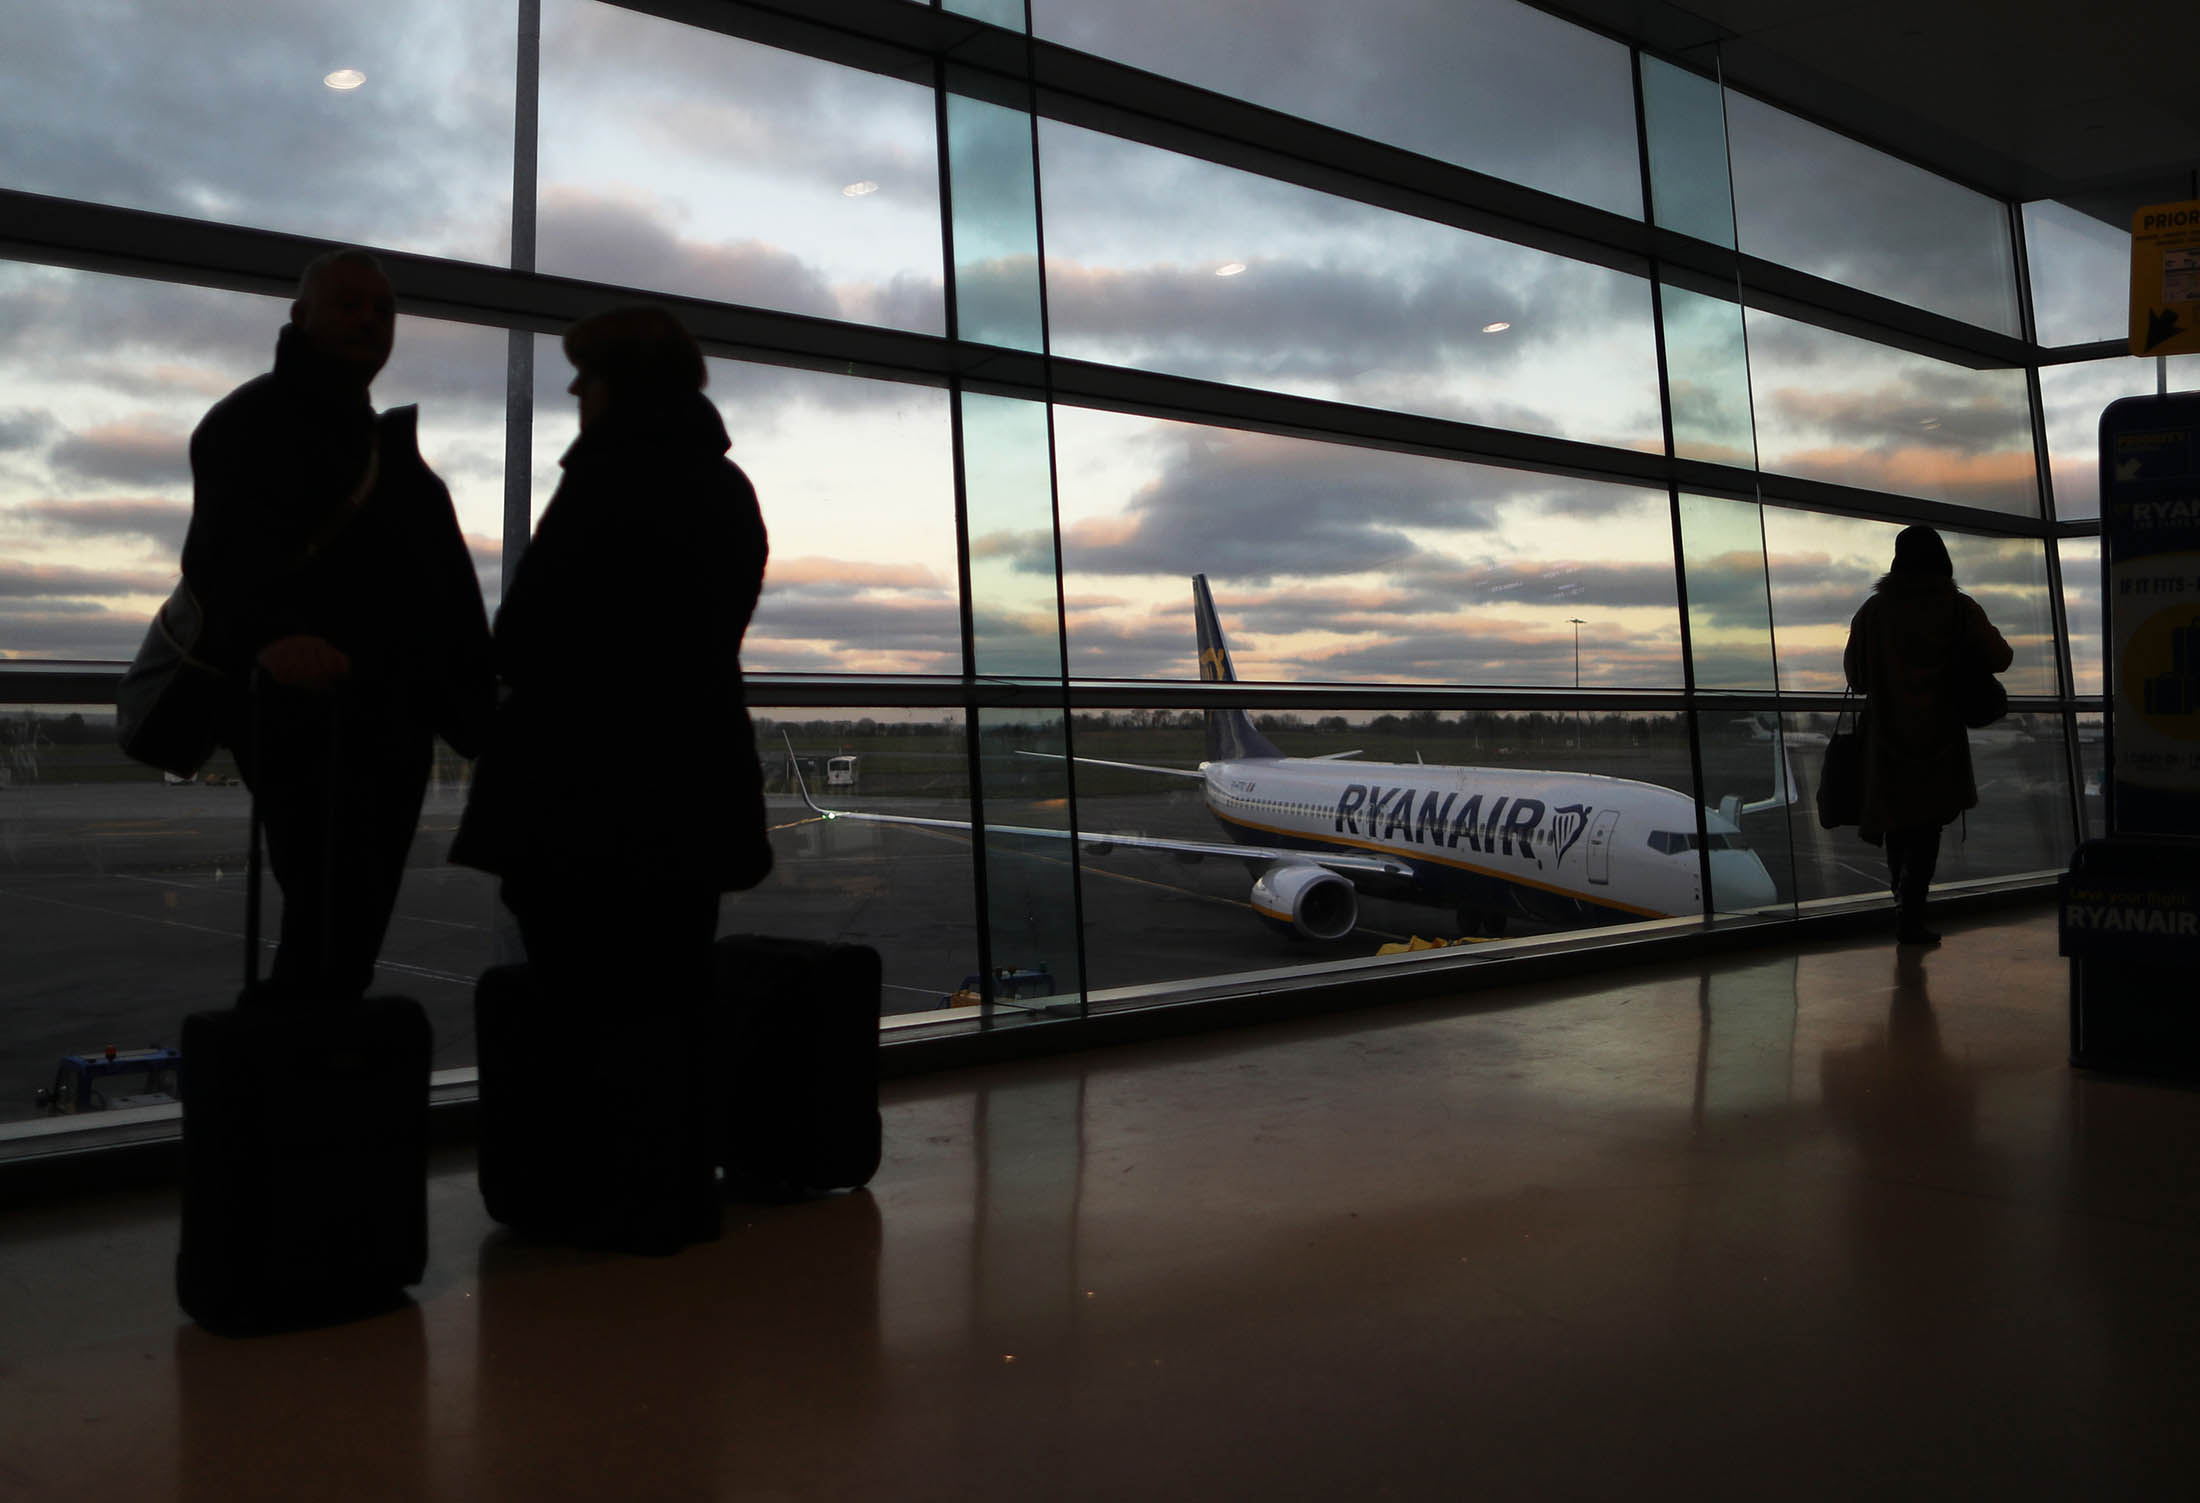 Passengers stand by a window as they wait to board a Ryanair Holdings Plc aircraft at Dublin Airport, operated by Dublin Airport Authority, in Dublin, Ireland, on Friday, Nov. 25, 2016. Ryanair provides low fare passenger airline services to destinations in Europe.
